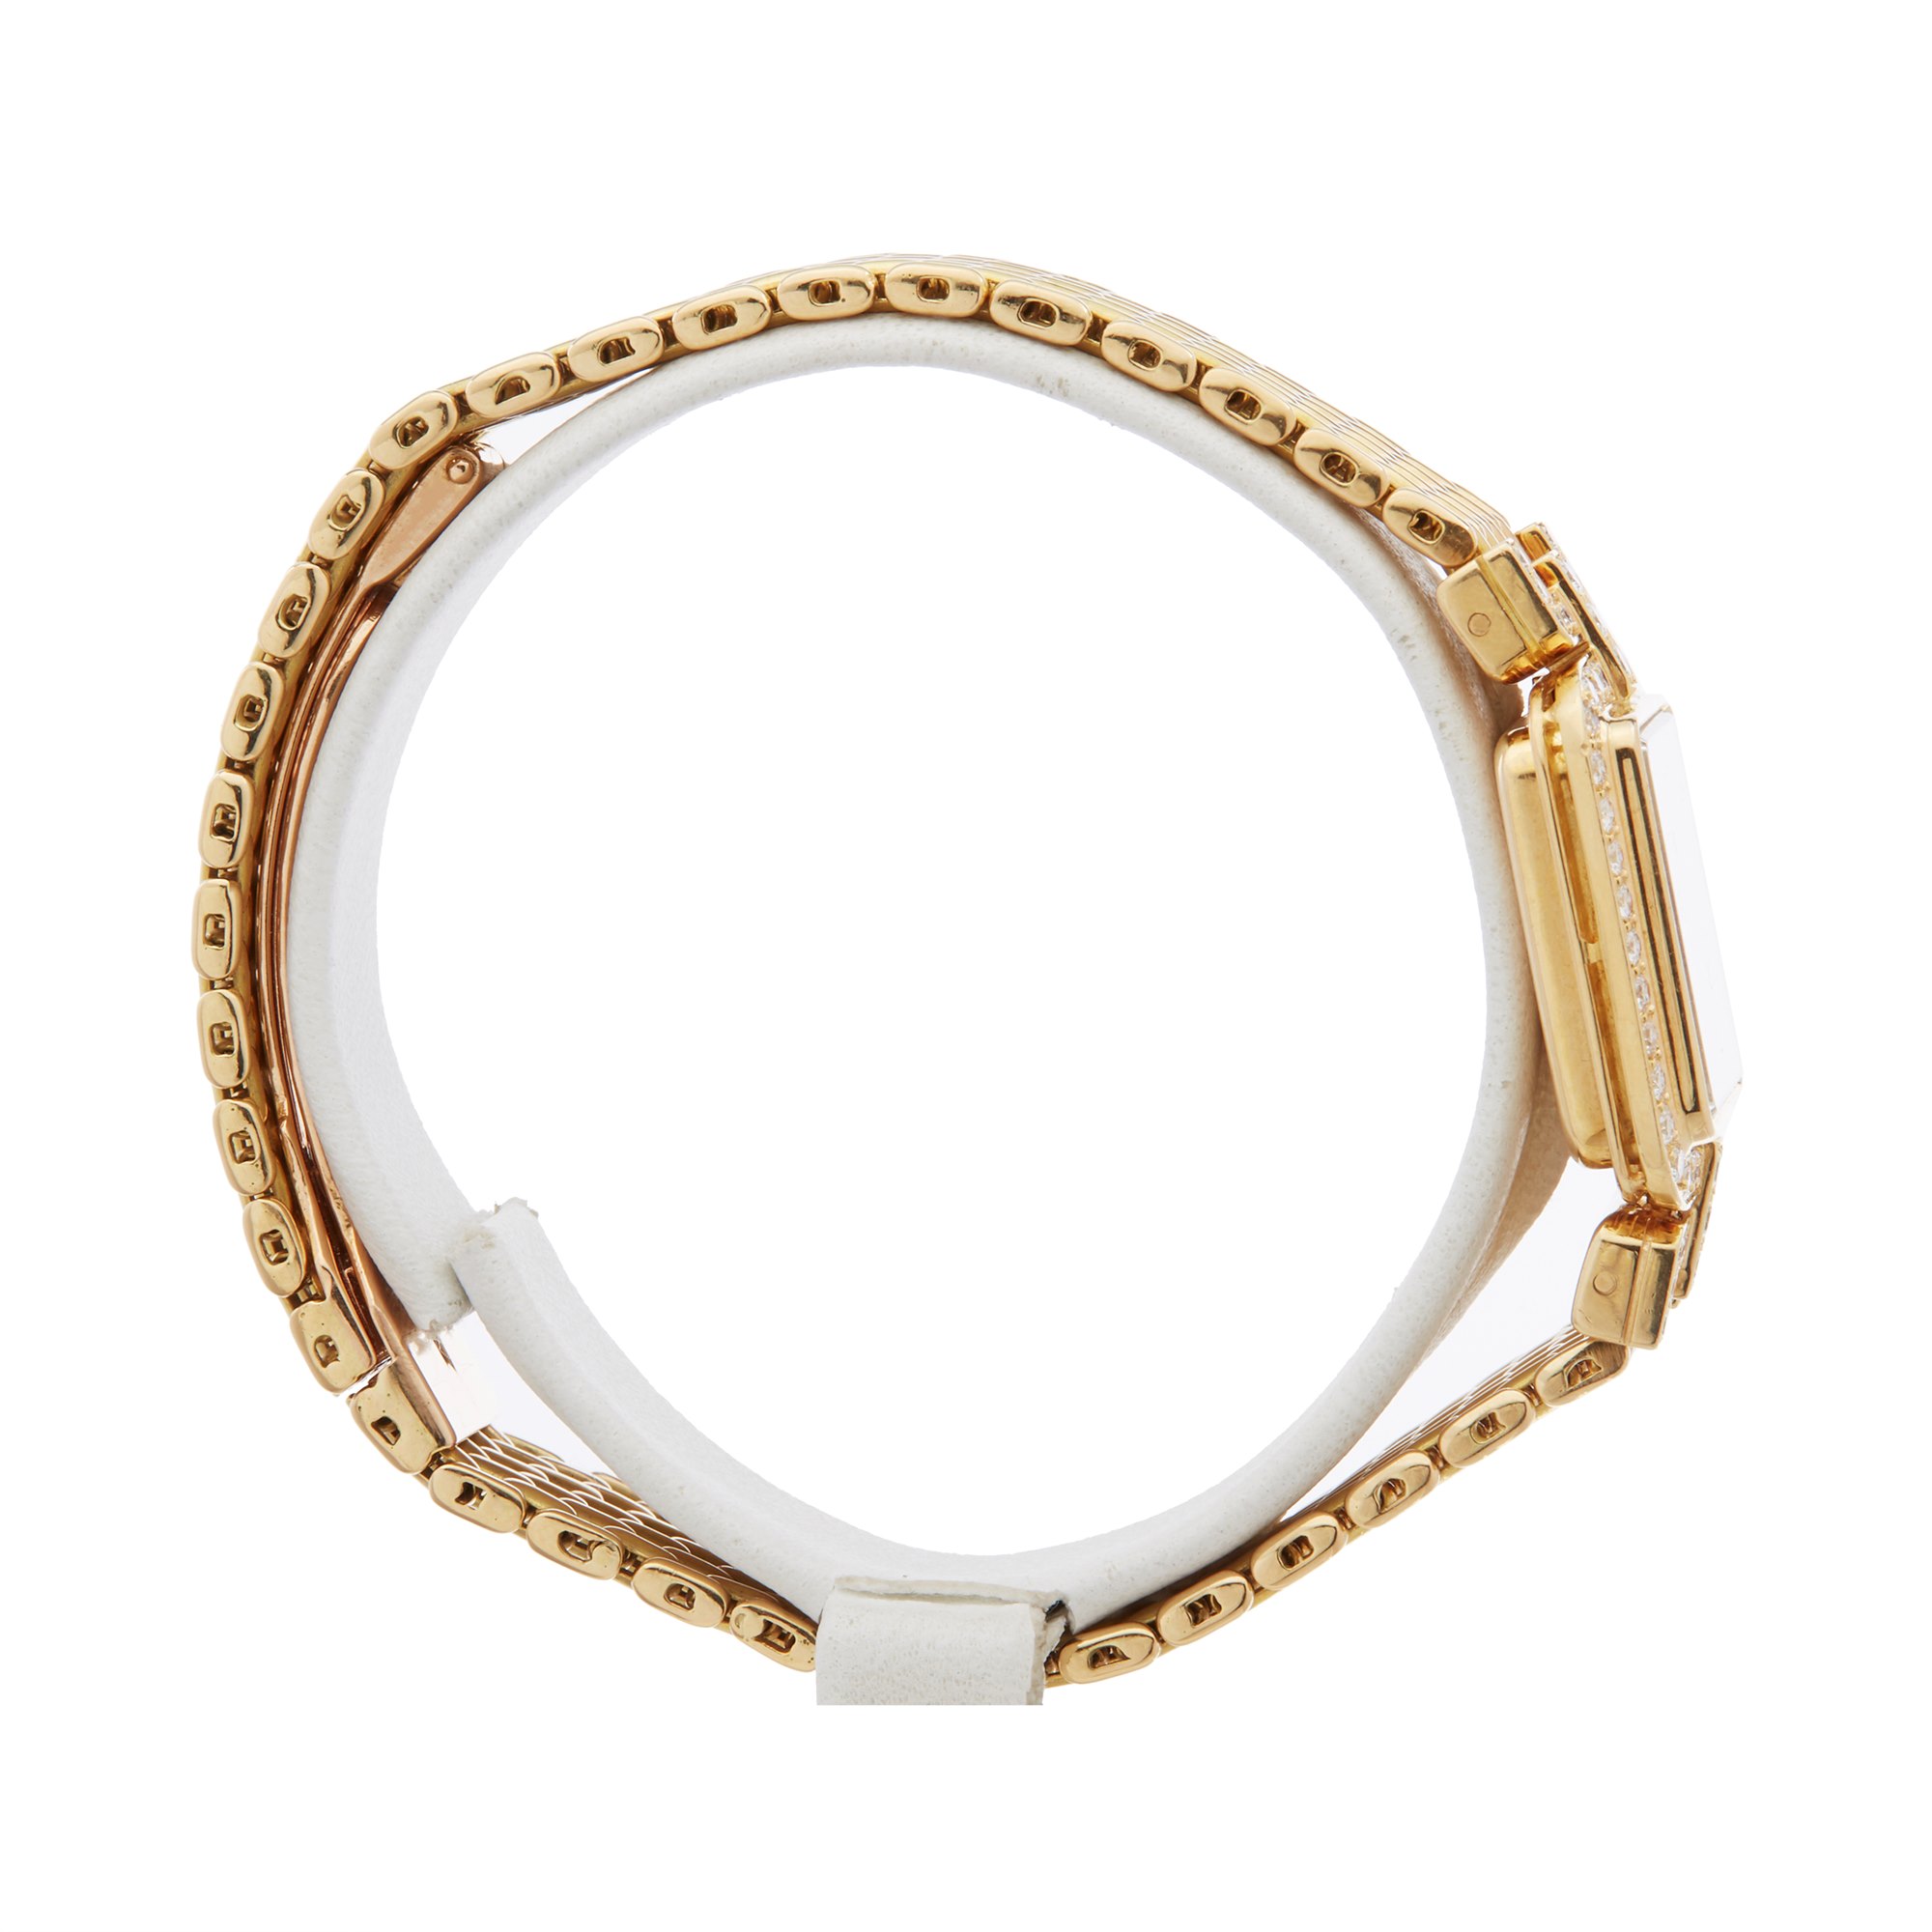 Cartier Sonate Paris Diamond Yellow Gold - 8914000 or 8035 Yellow Gold 8914000 or 8035